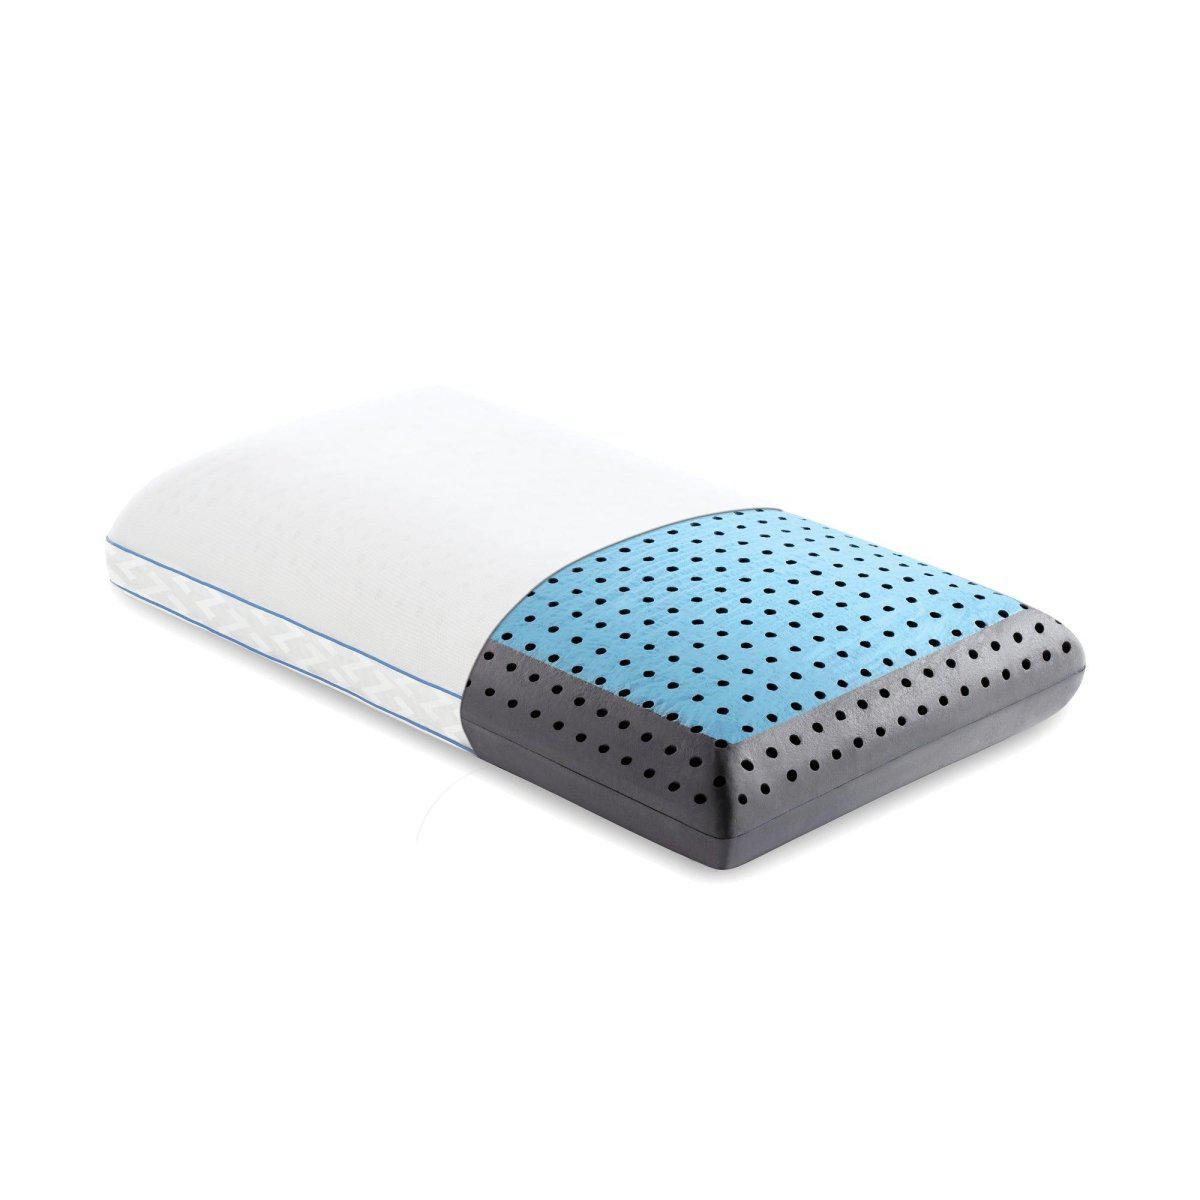 Carbon Cooling Pillow1malouf